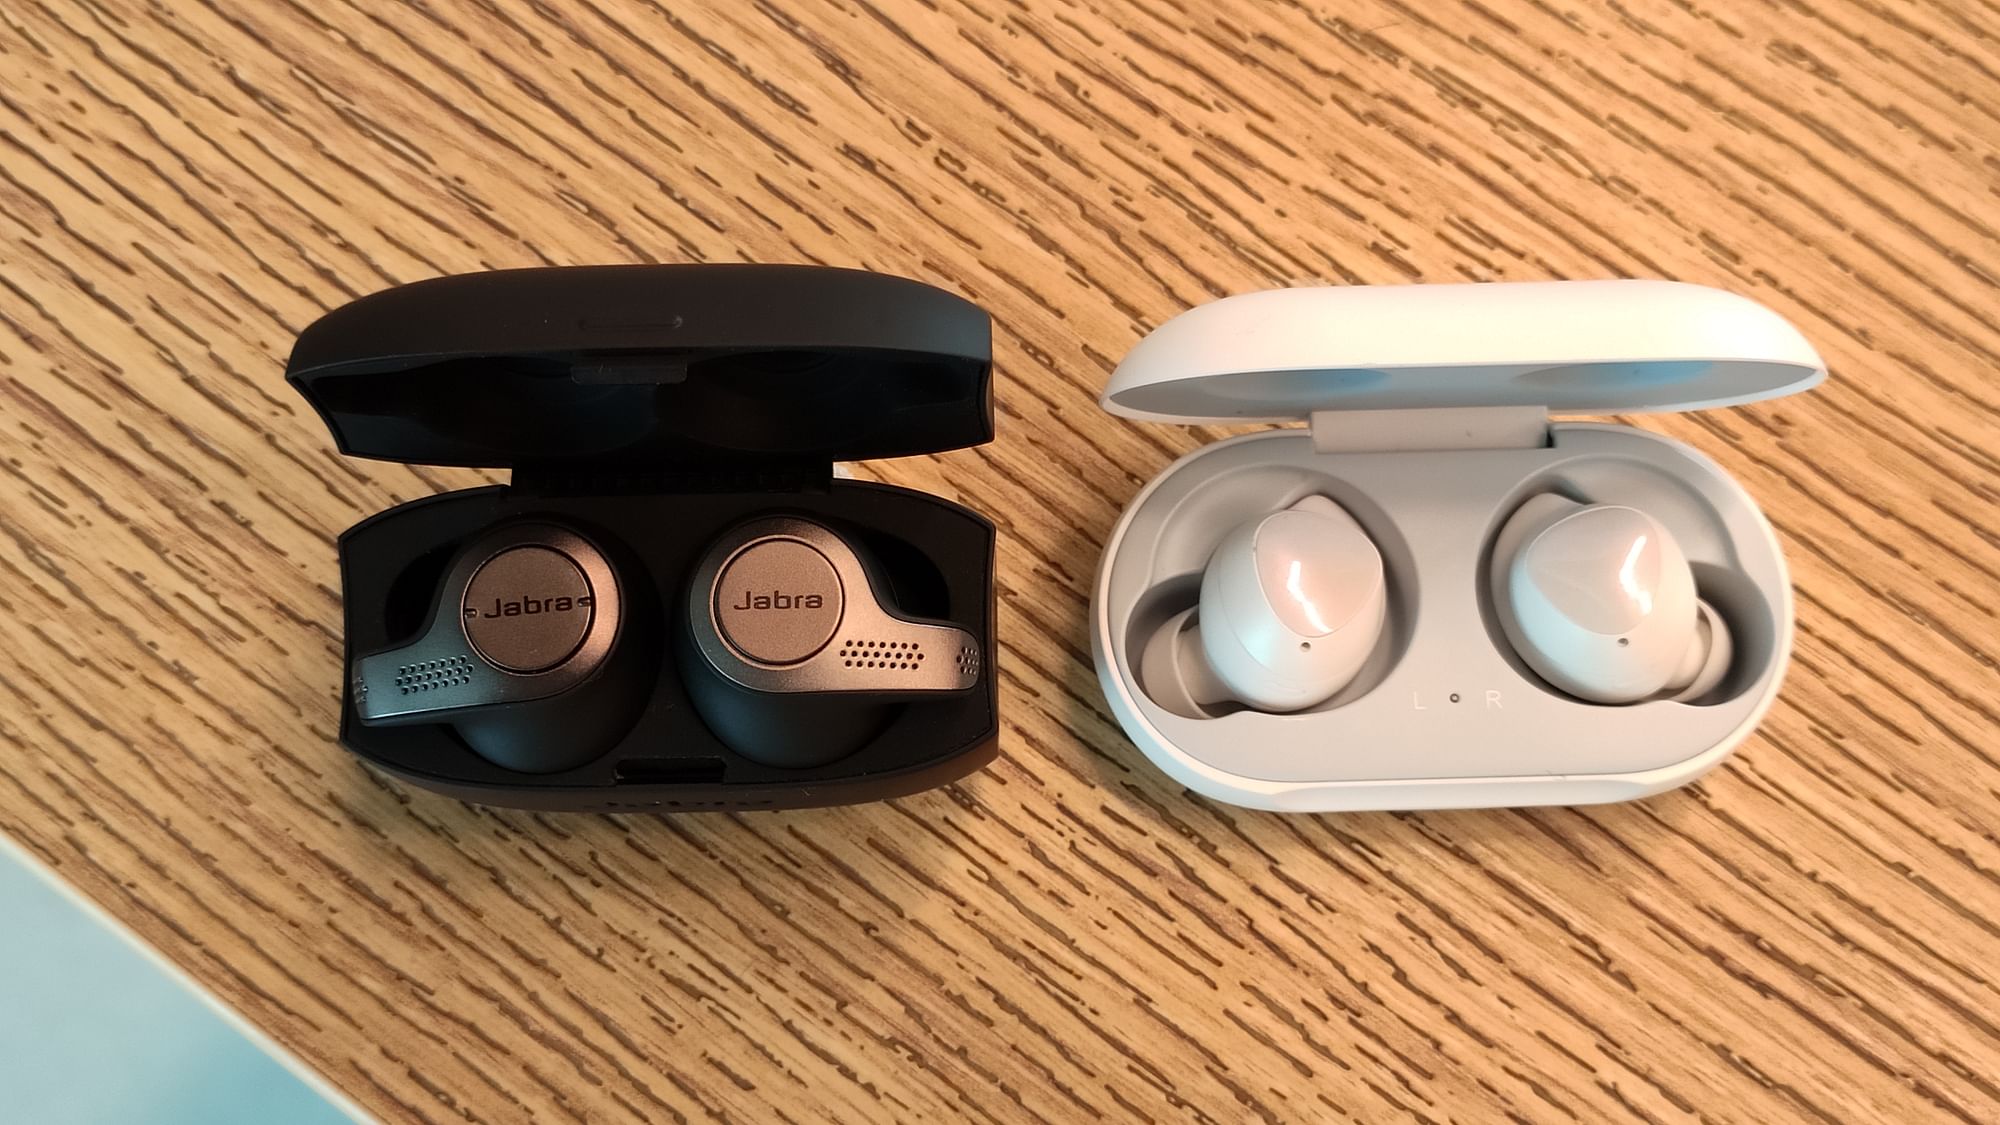 The Jabra Evolve 65t (left) and the Samsung galaxy Buds (right).